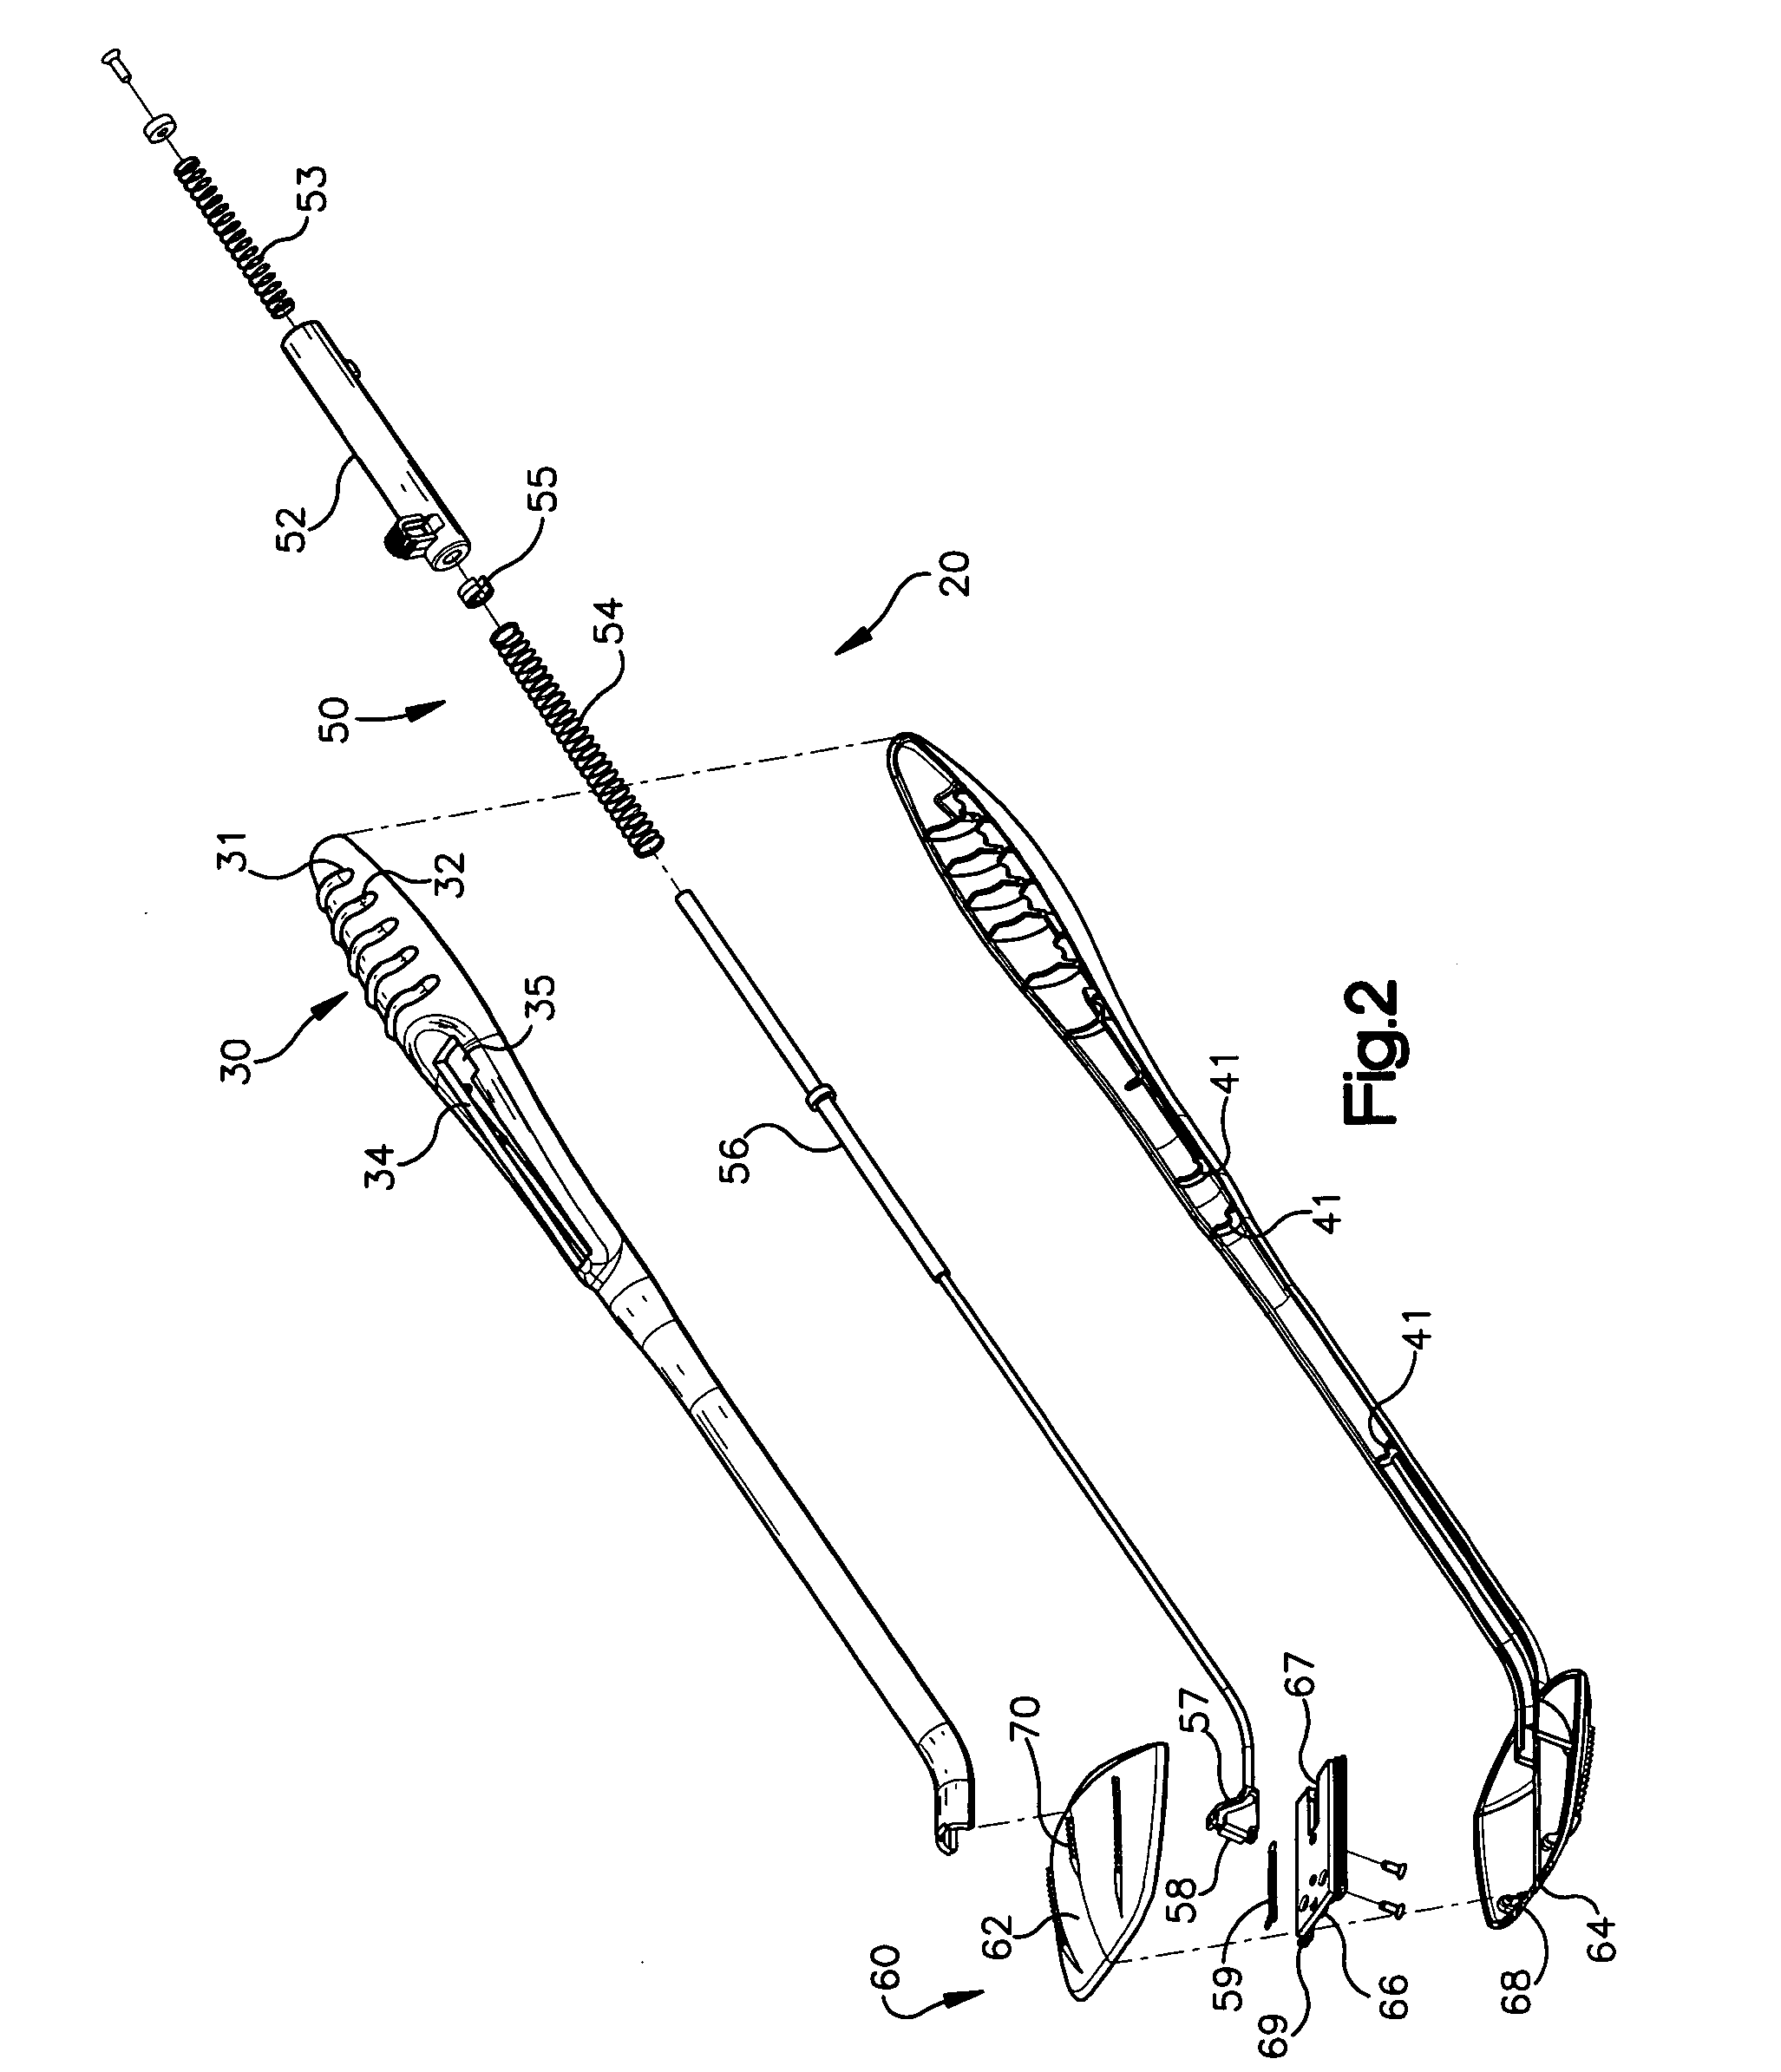 Toilet cleaning apparatus and caddy